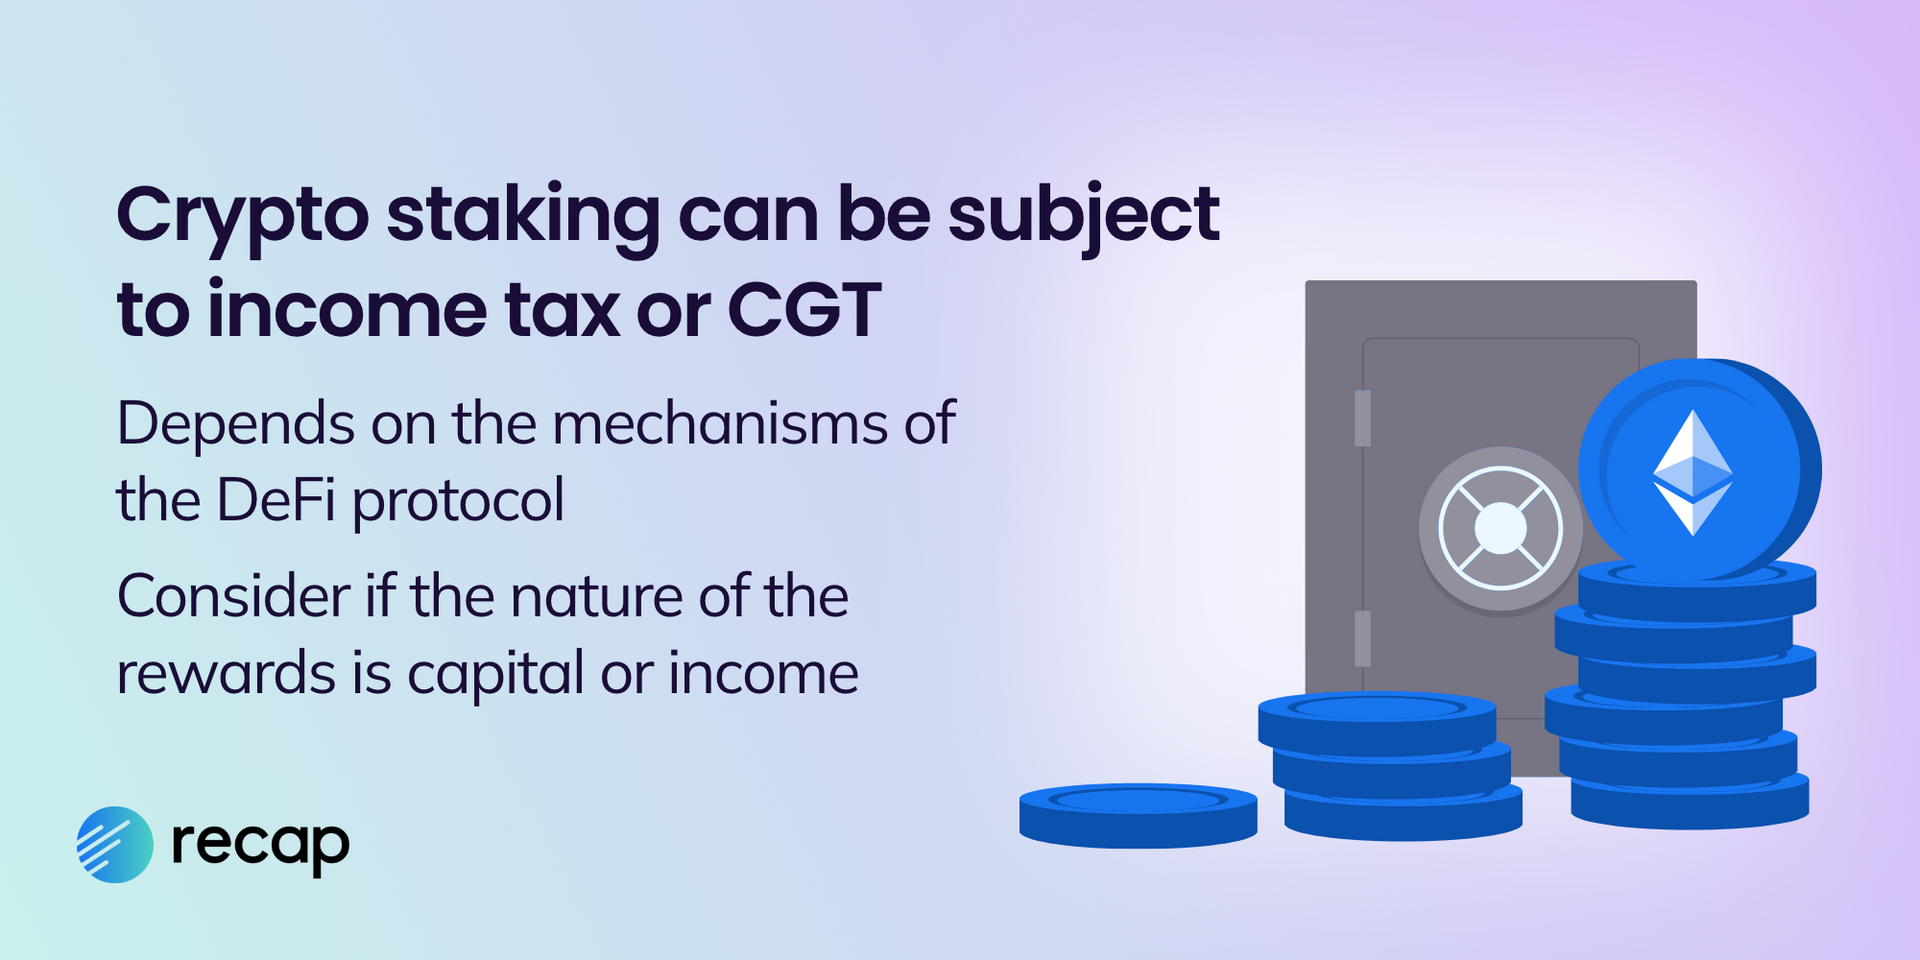 Infographic stating that crypto staking can be subject to income tax or capital gains tax depending on the mechanisms of the DeFi protocol, also consider if the nature of the rewards is capital or income